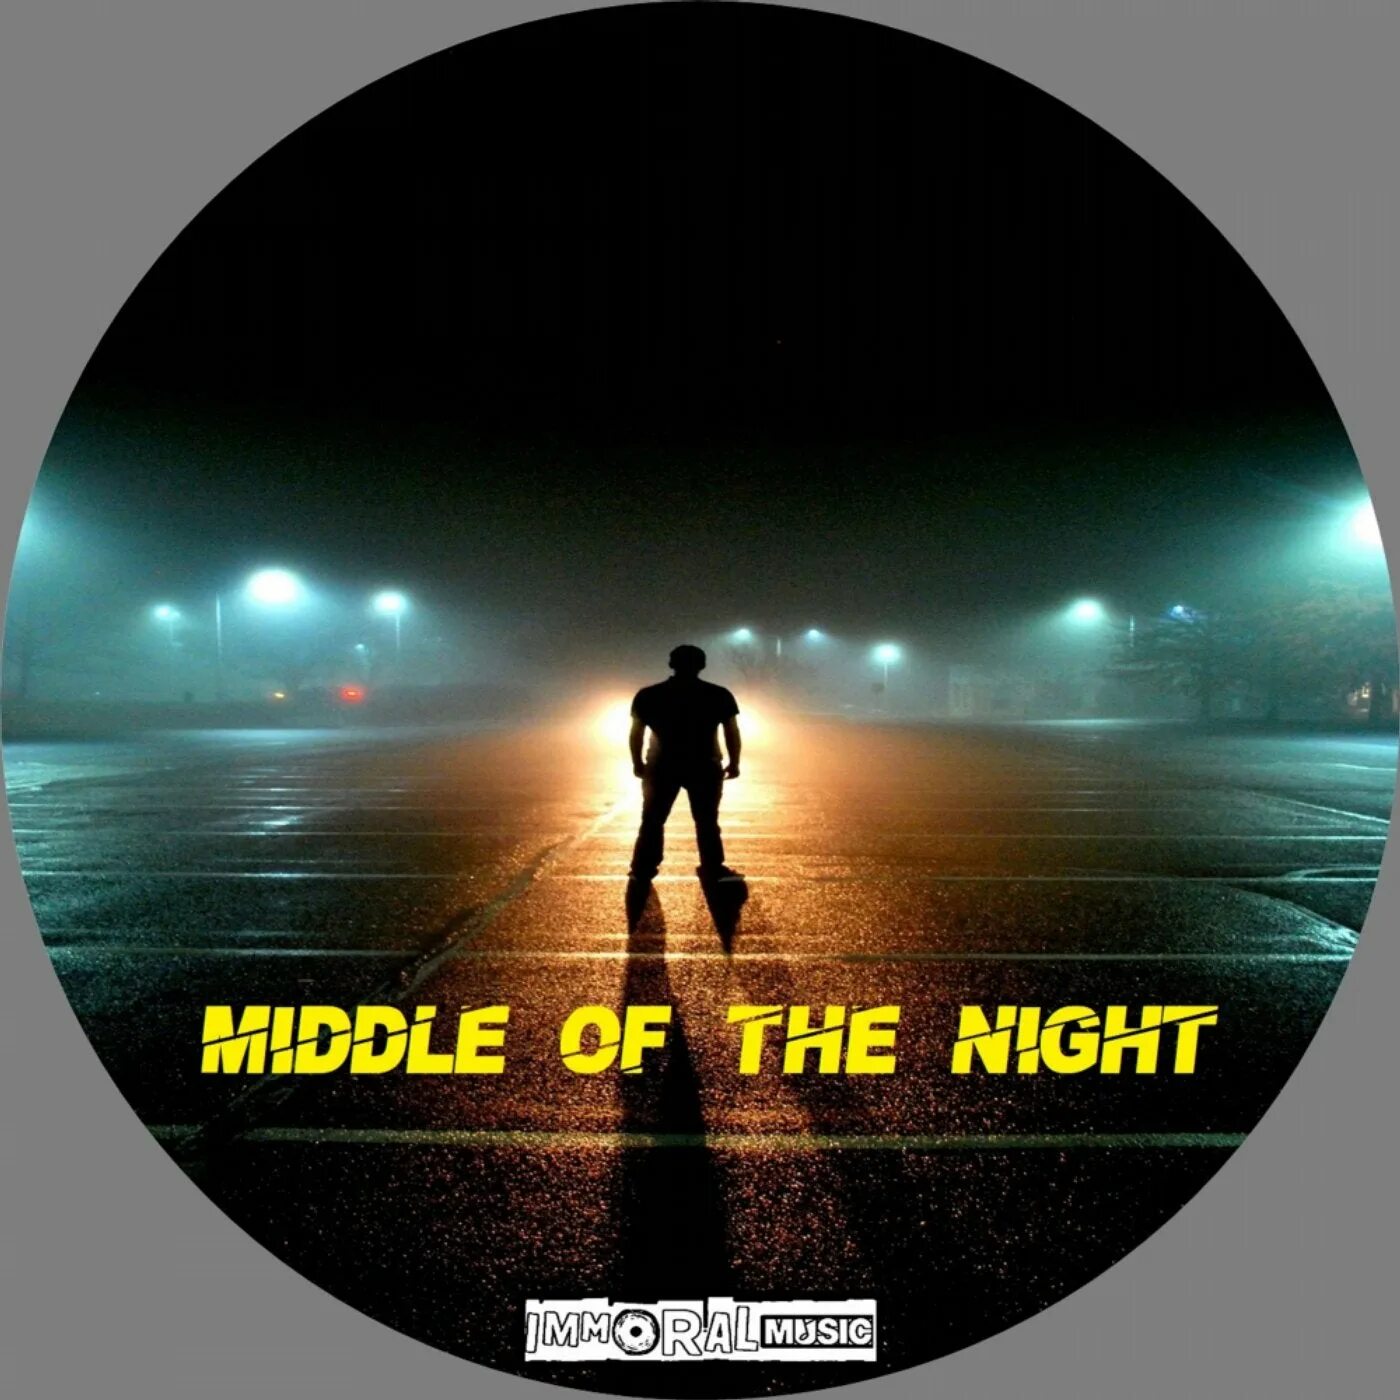 Middle of the Night. Middle of the Night обложка. Обложка песни Middle of the Night. In the Middle of the Night картинки.